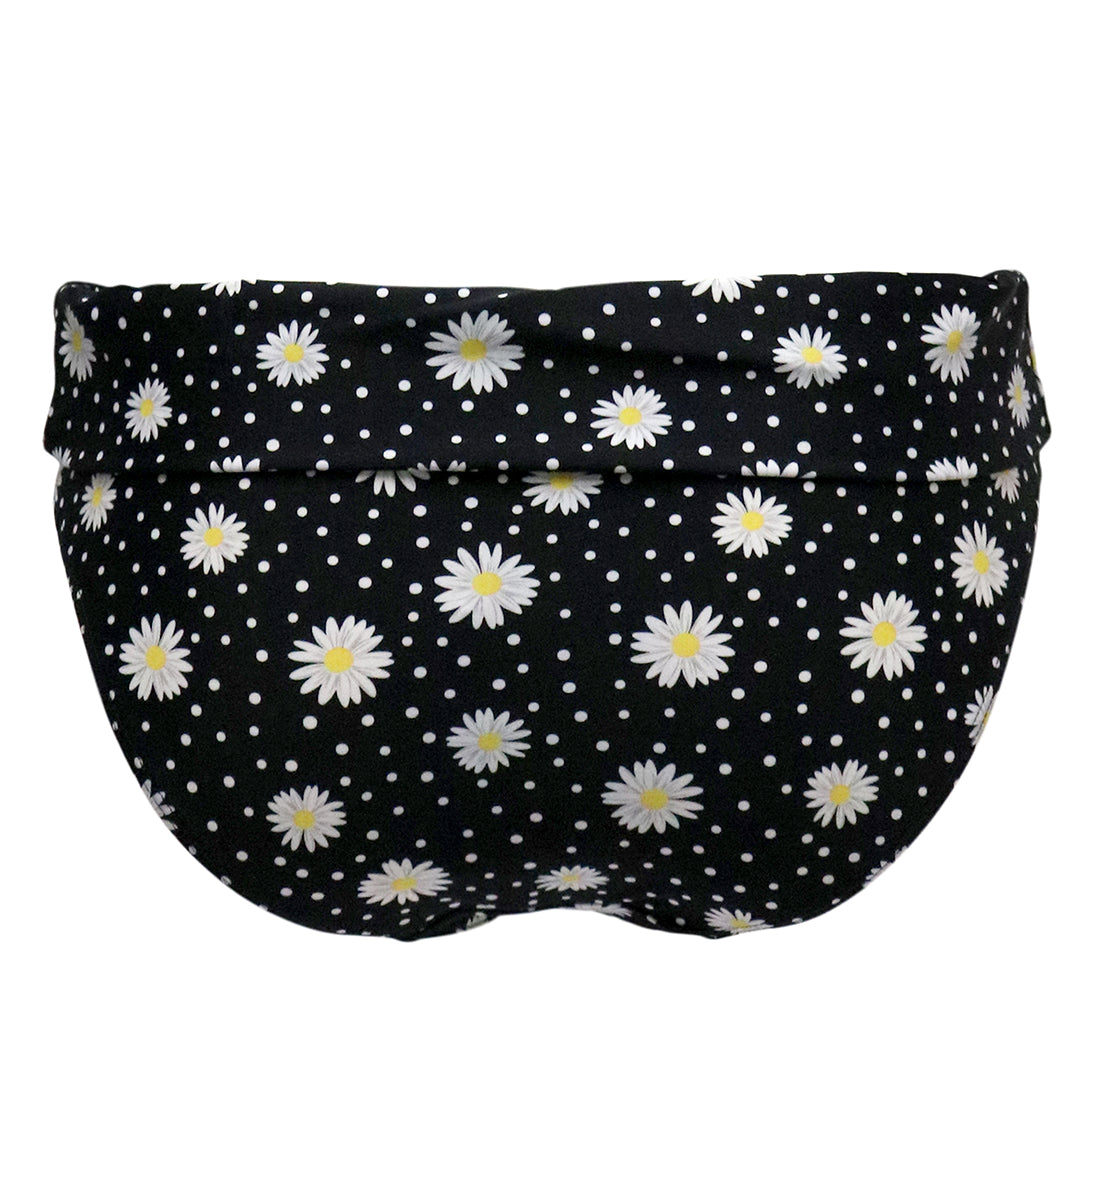 Pour Moi Out Of Office Fold Over Swim Brief (24504),Small,Daisy Spot - Daisy Spot,Small